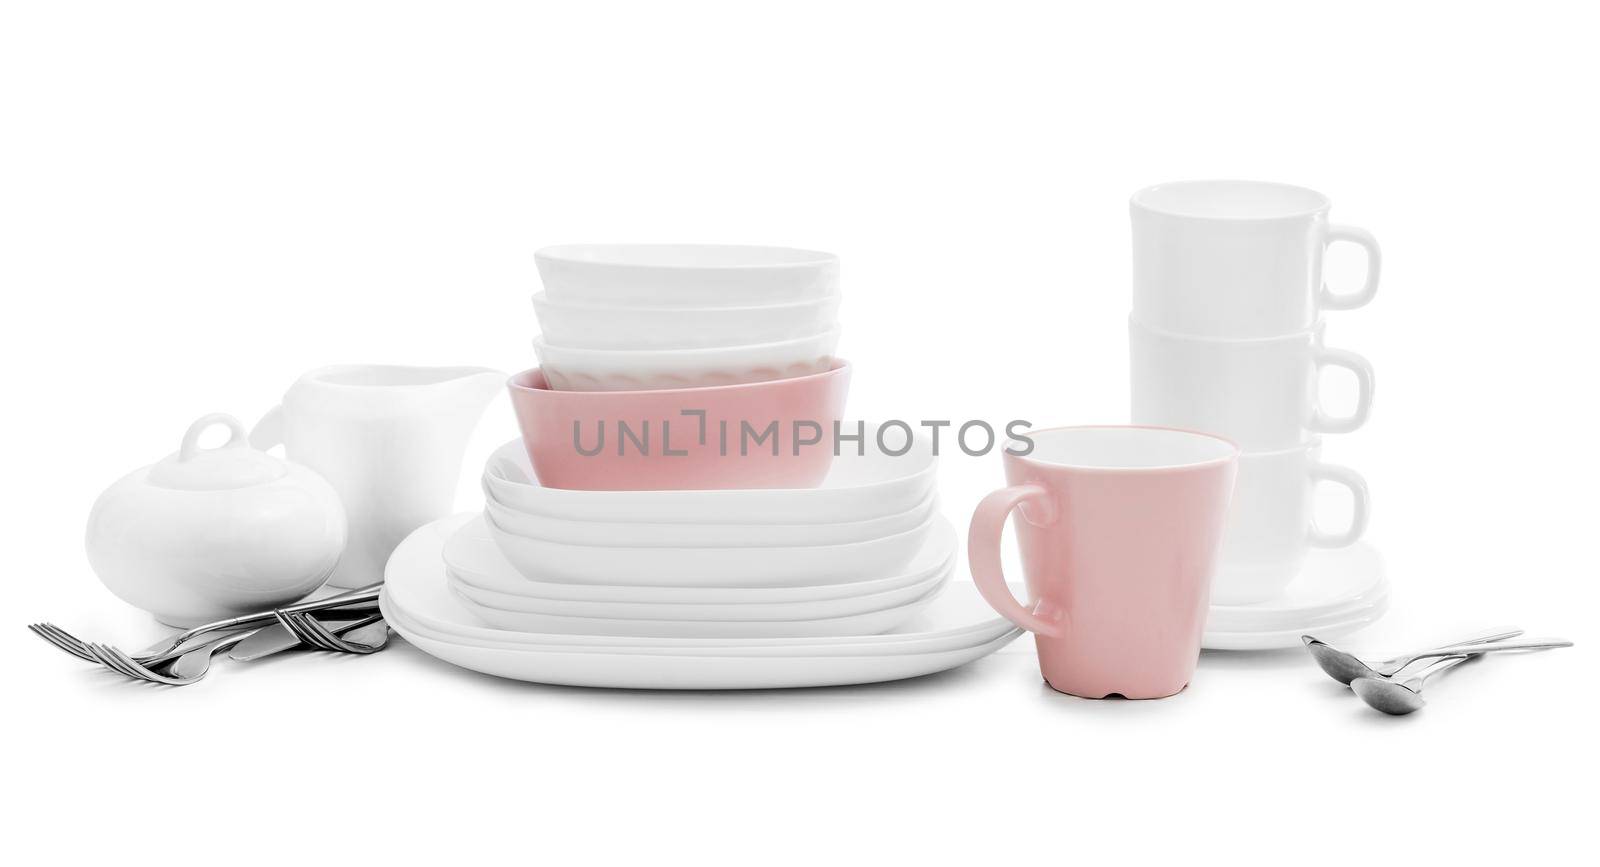 White and pink plates, sugar bowl and mugs on light background by tan4ikk1